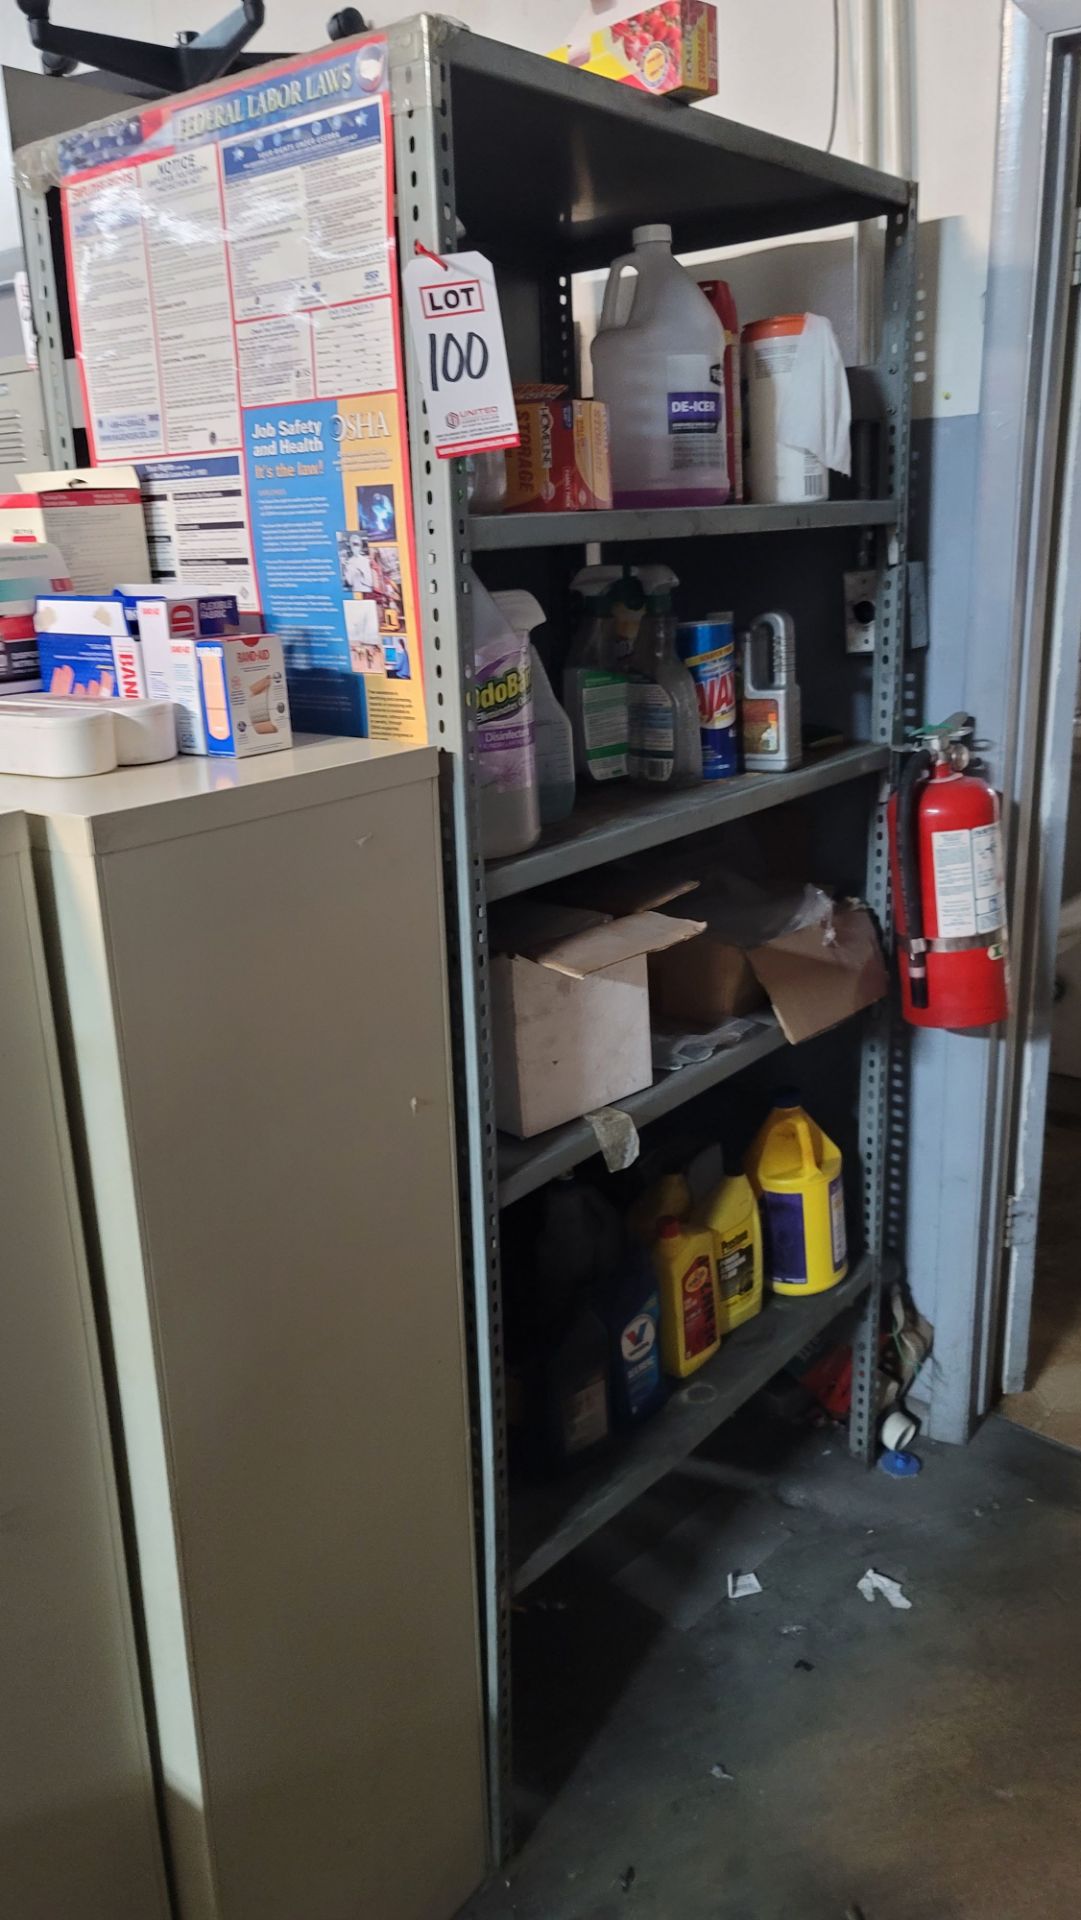 STEEL SHELF UNIT, 3' X 2' X 6' HT, CONTENTS NOT INCLUDED, (LOCATION: 2174 W 2300 S)